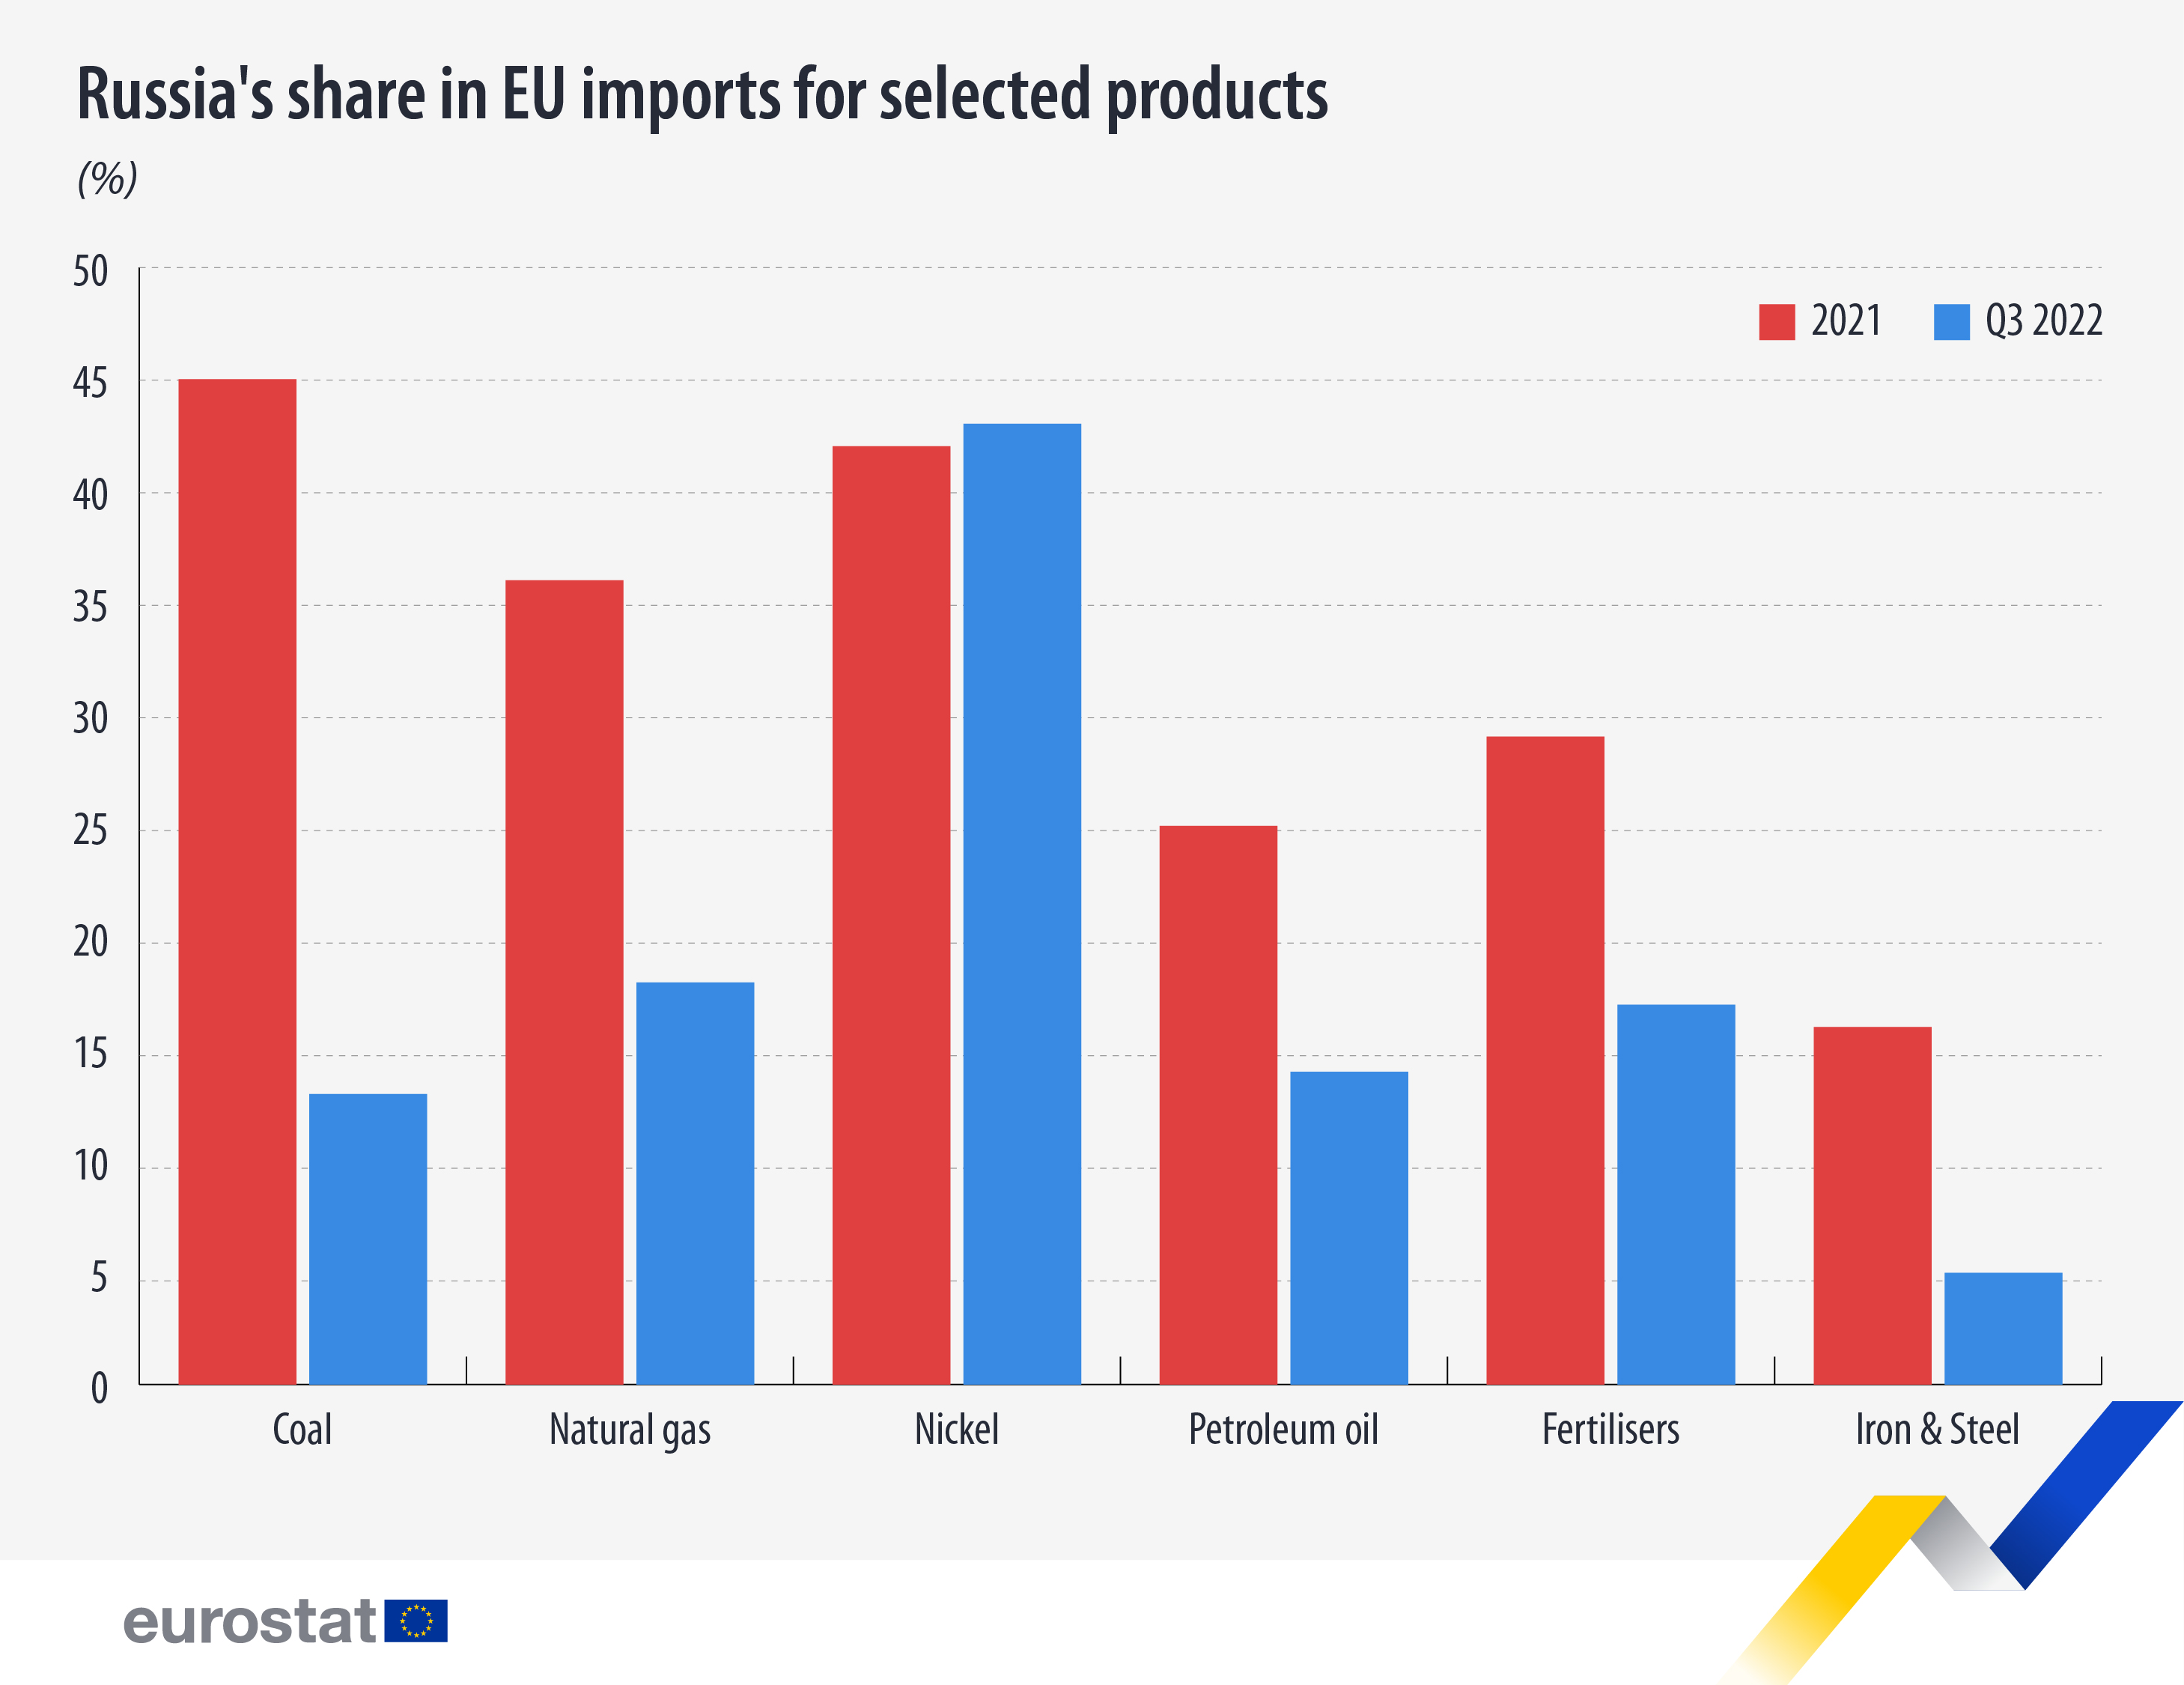 Russia's share in EU imports for selected products in 2021 and Q3 2022